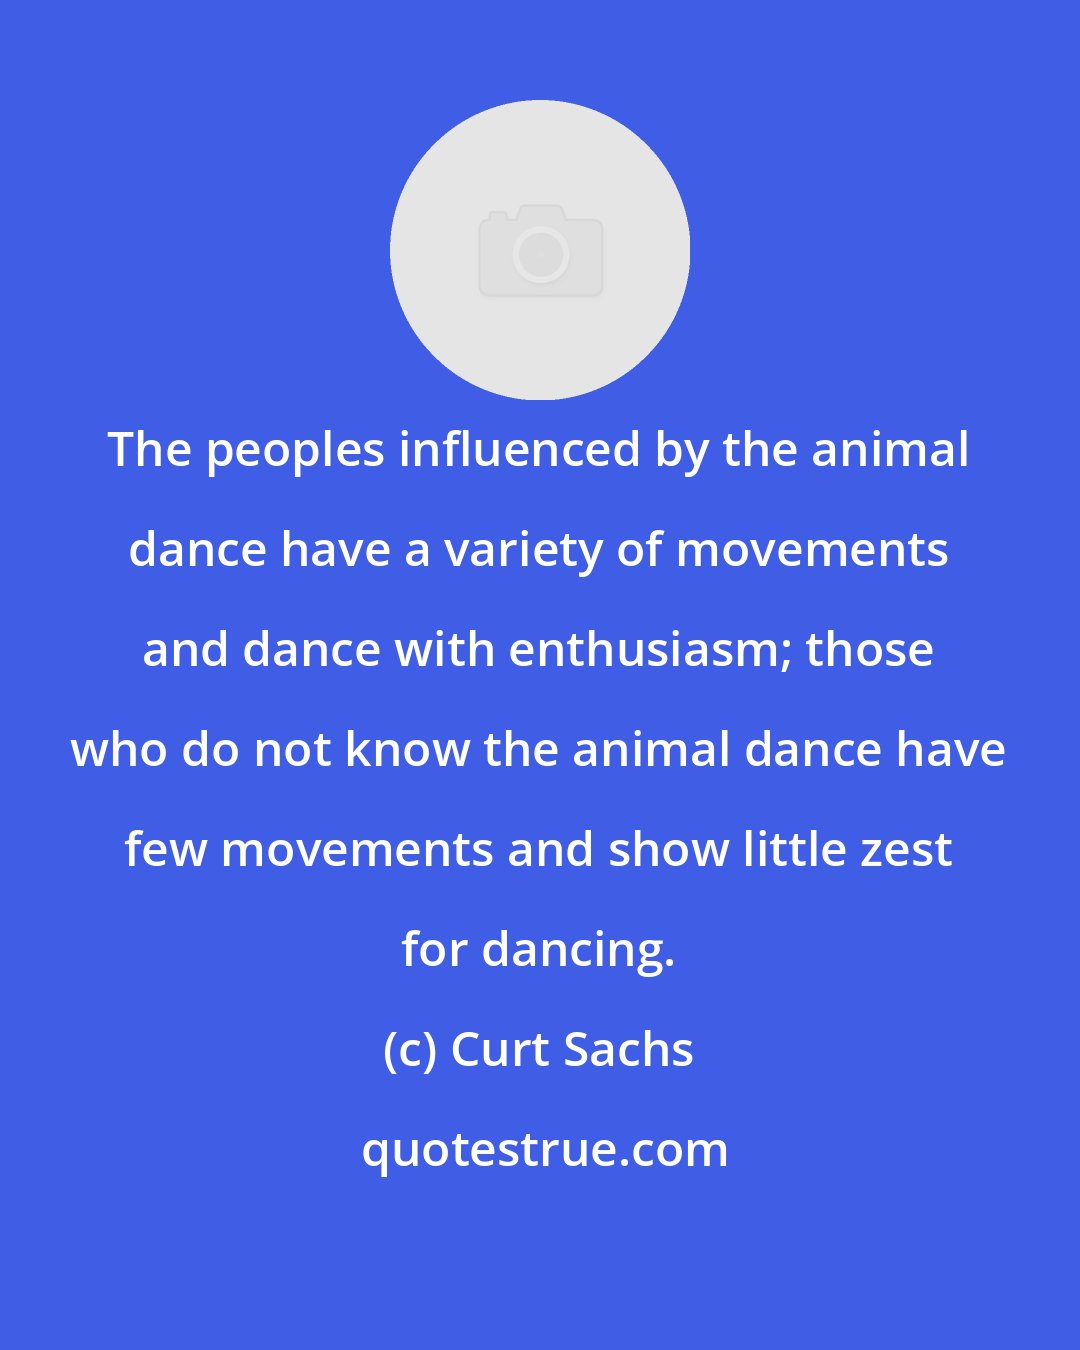 Curt Sachs: The peoples influenced by the animal dance have a variety of movements and dance with enthusiasm; those who do not know the animal dance have few movements and show little zest for dancing.